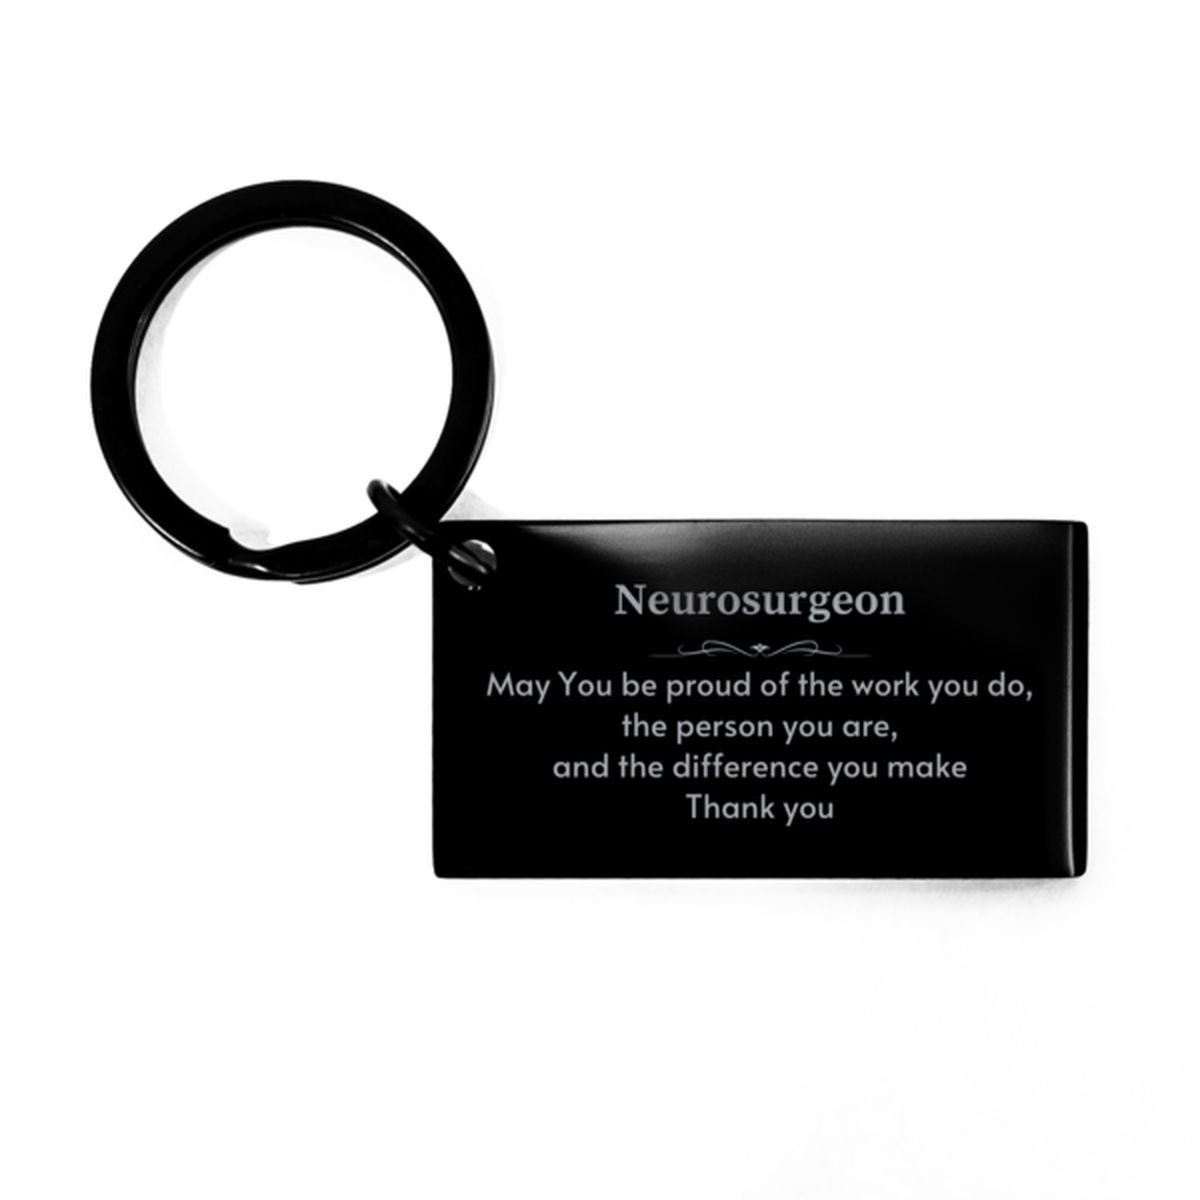 Heartwarming Keychain Retirement Coworkers Gifts for Neurosurgeon, Pediatrician May You be proud of the work you do, the person you are Gifts for Boss Men Women Friends